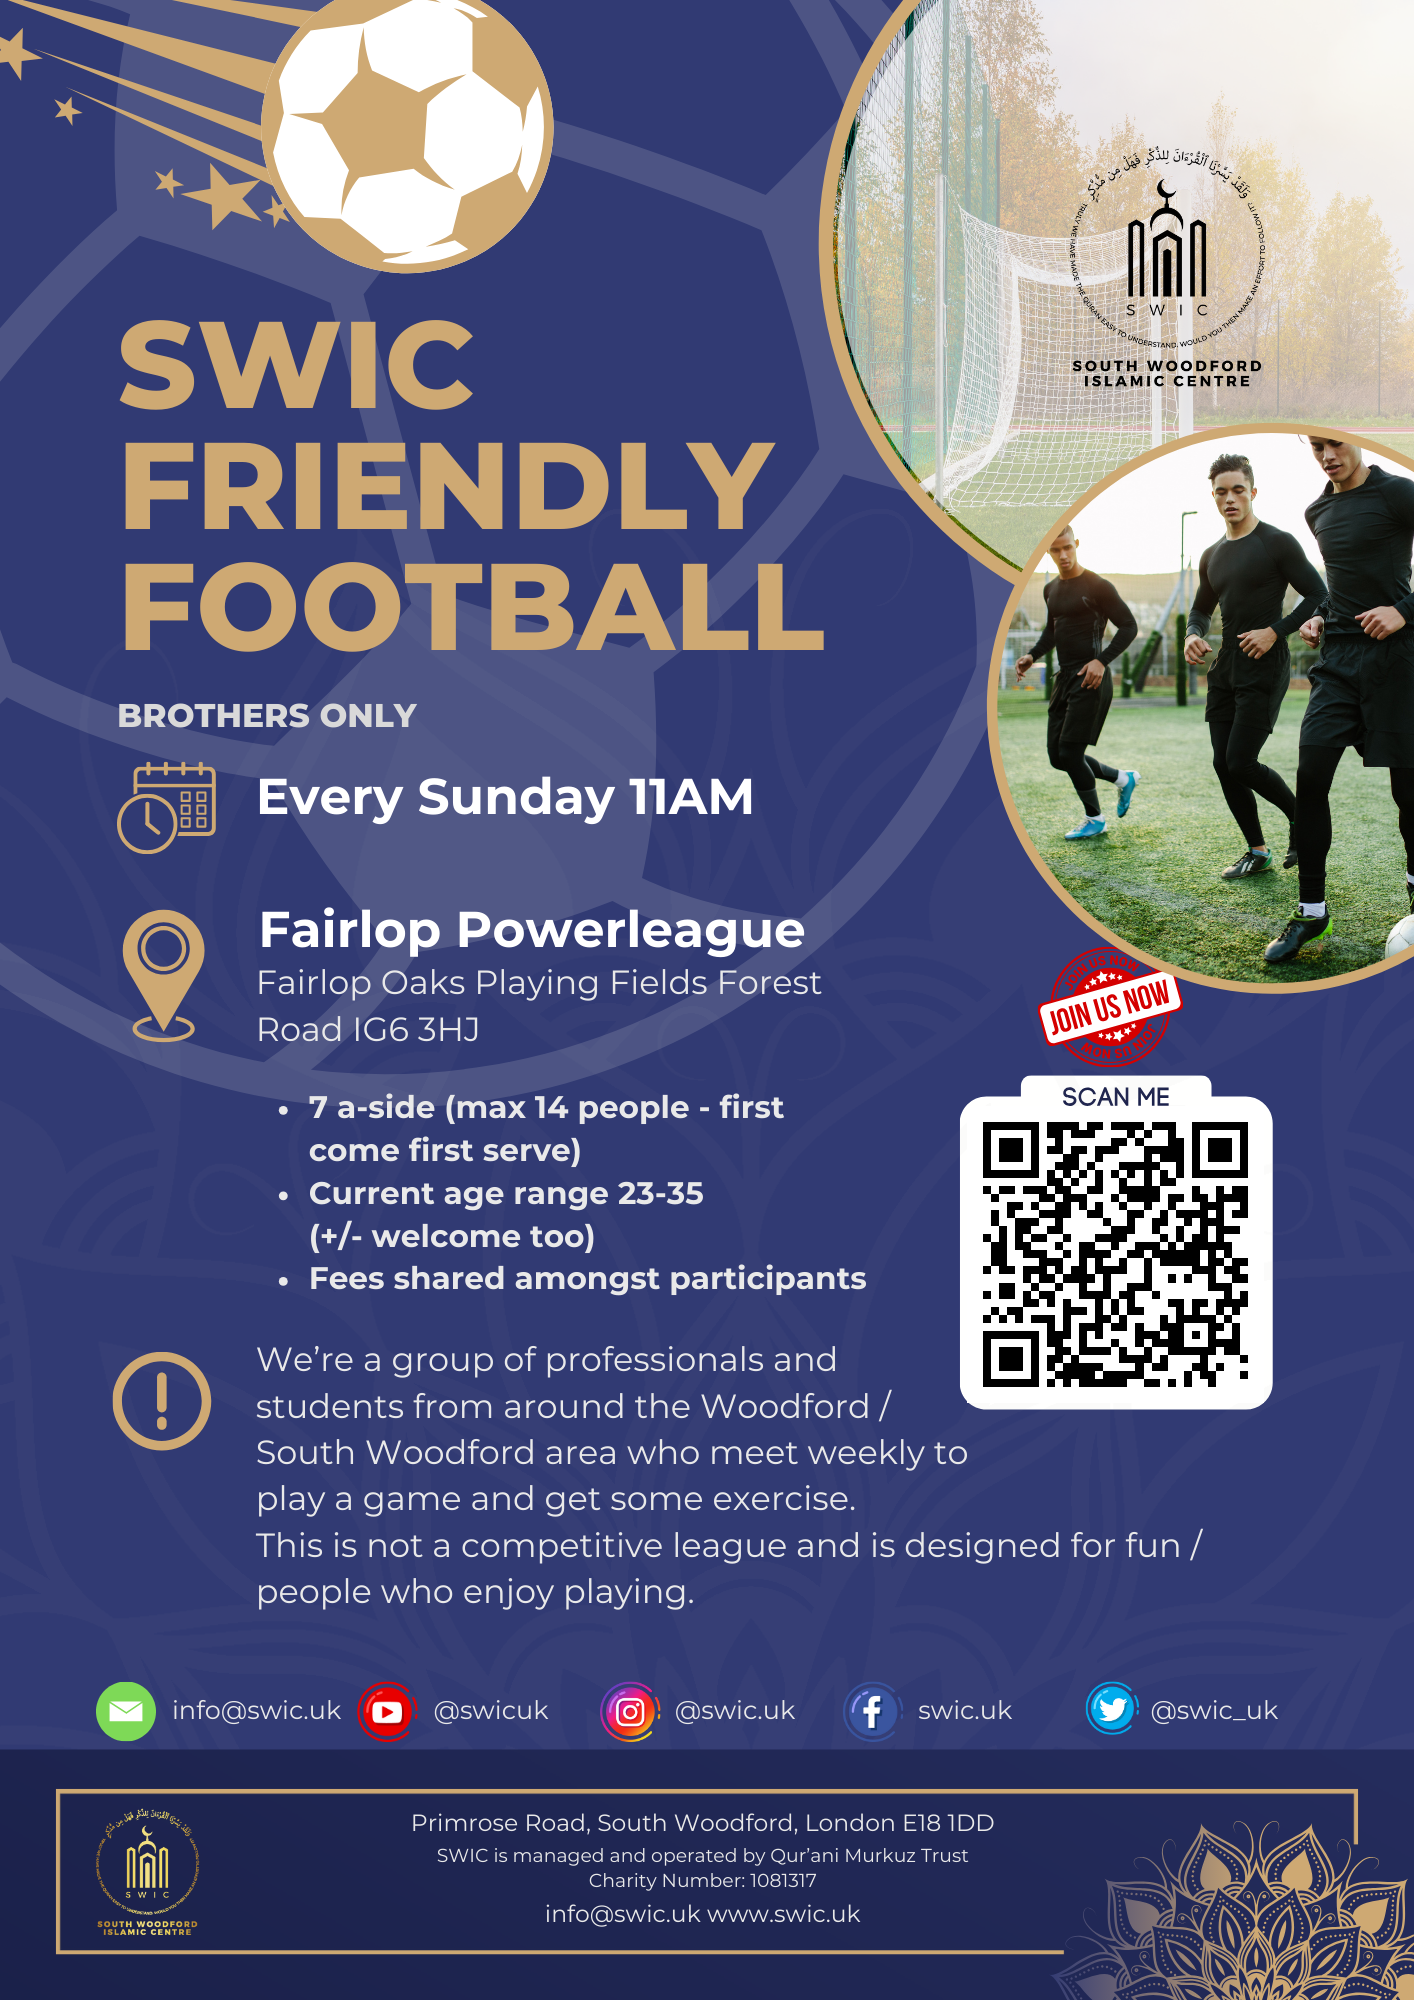 SWIC Friendly Football - tap on event for more details